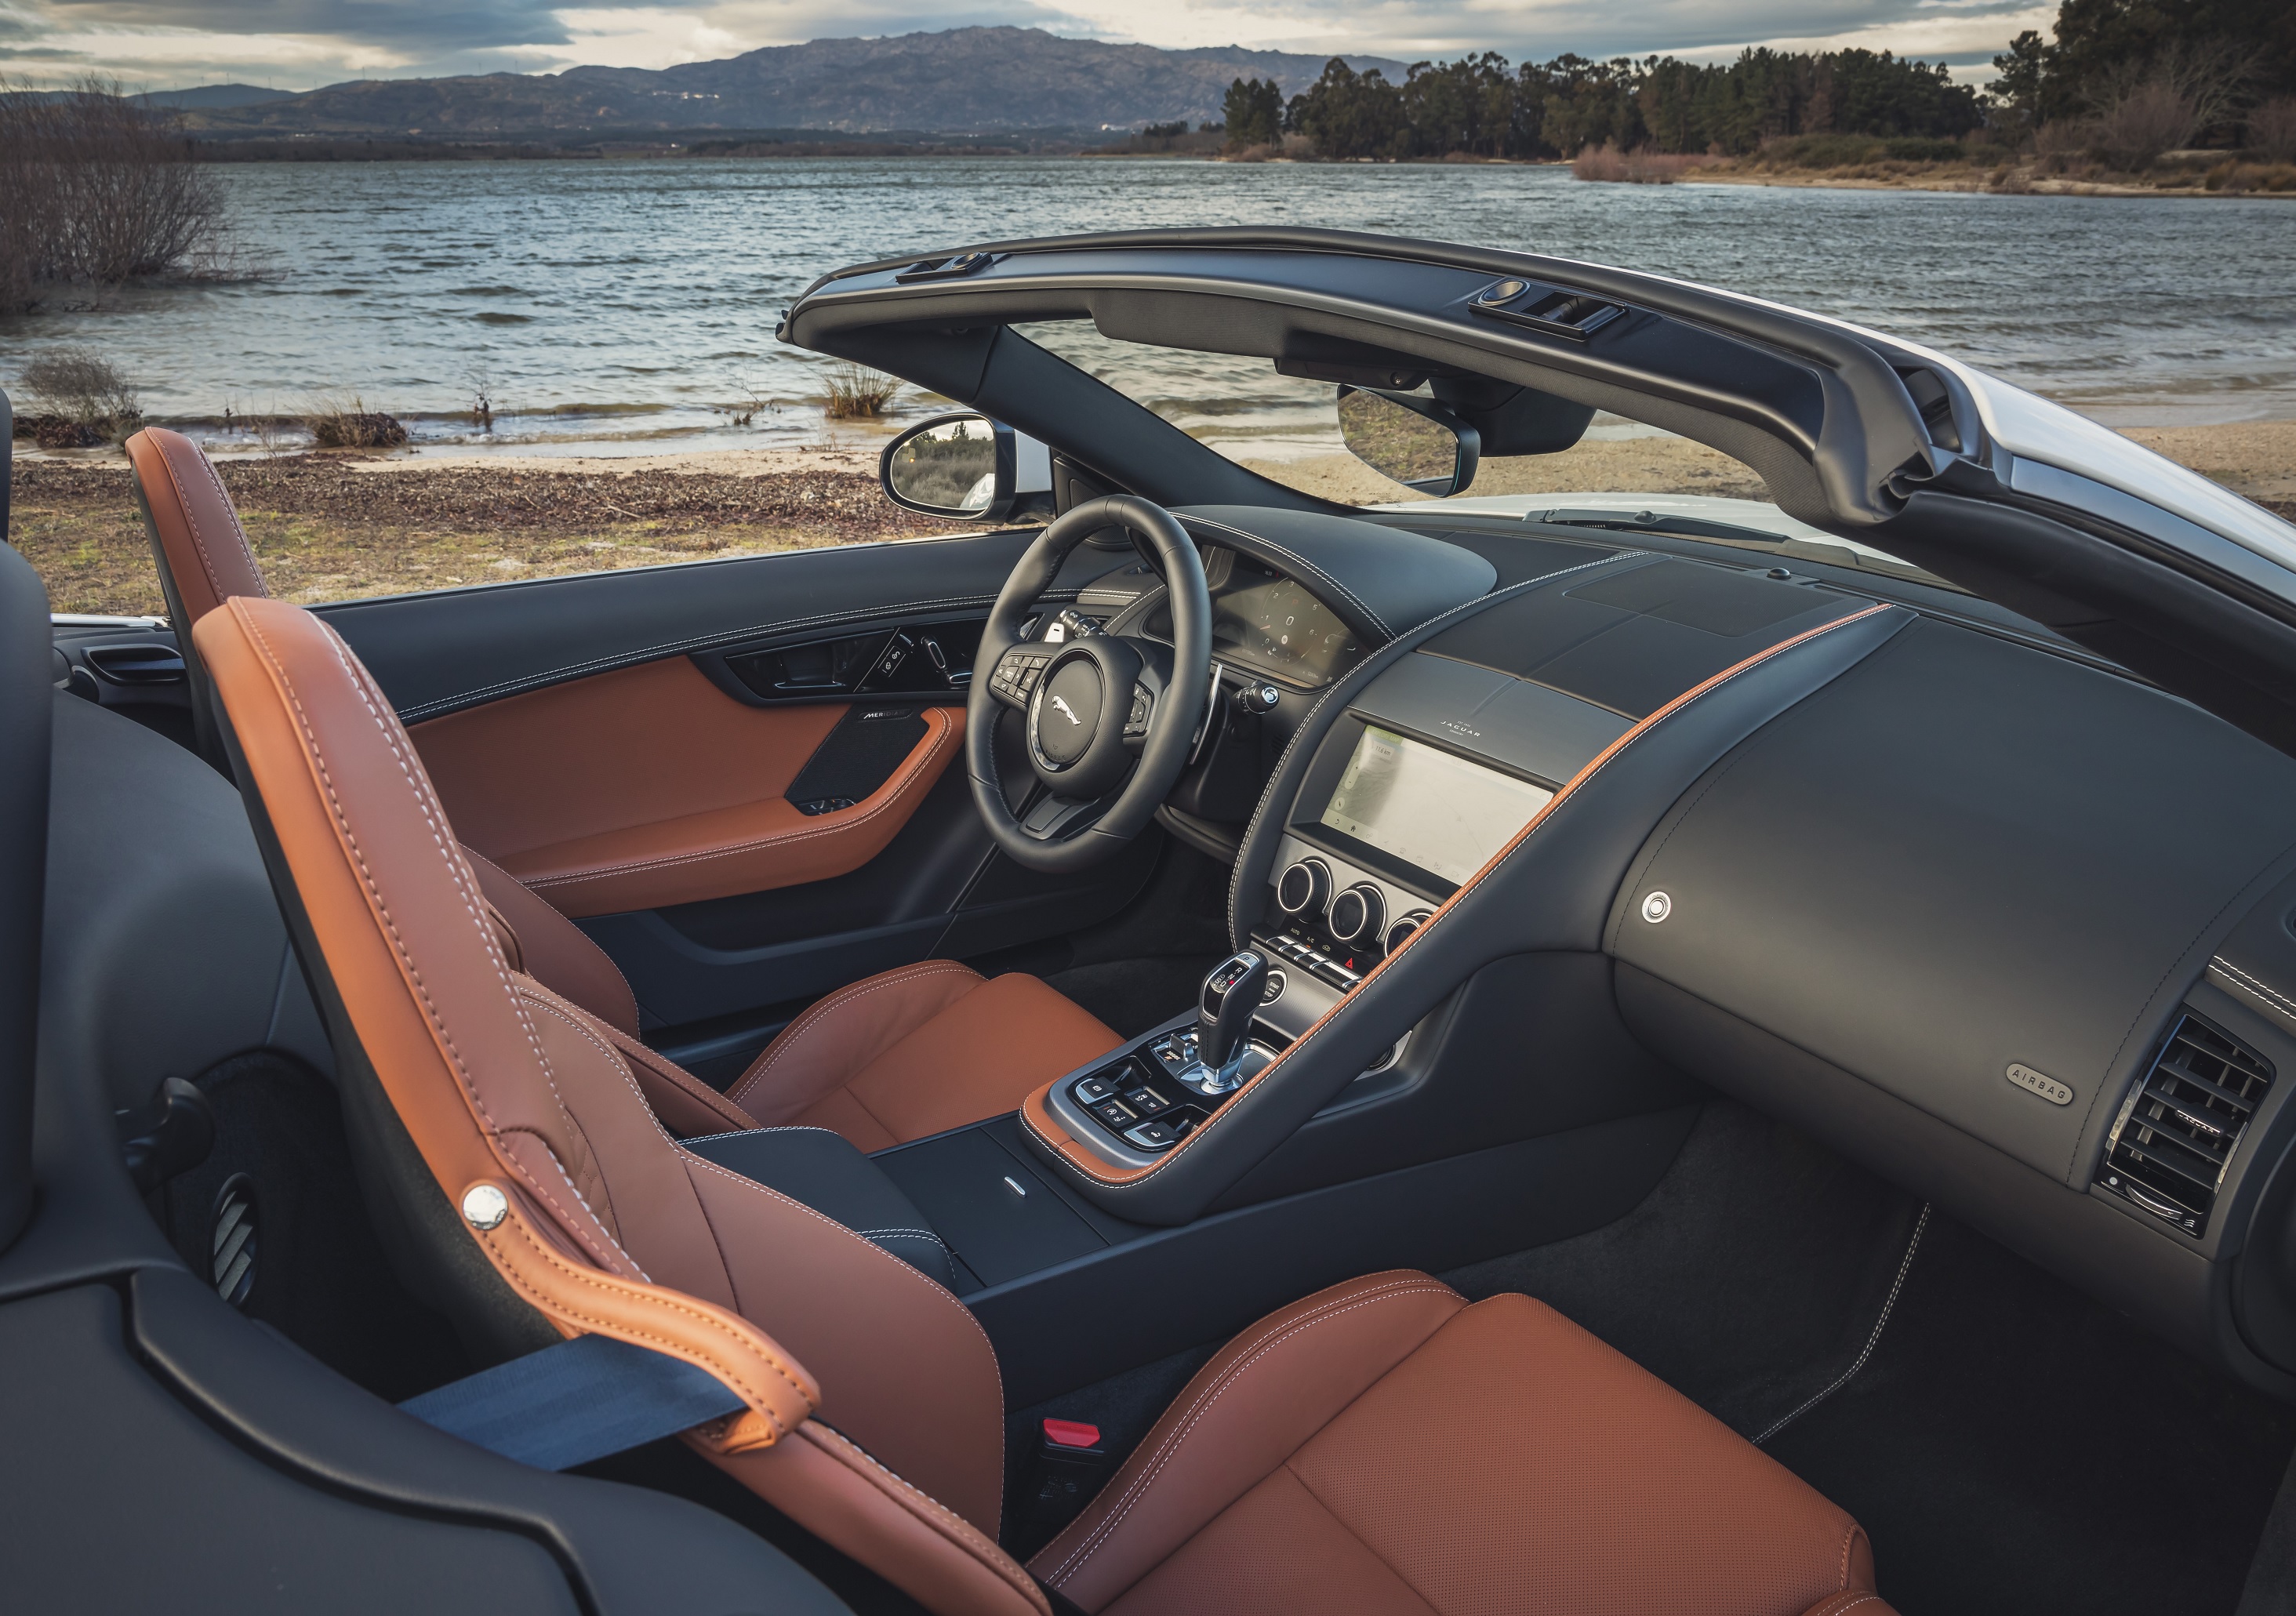 The brown leather seats and black leather dashboard of a 2022 Jaguar F-Type Convertible P450 next to a mountain lake